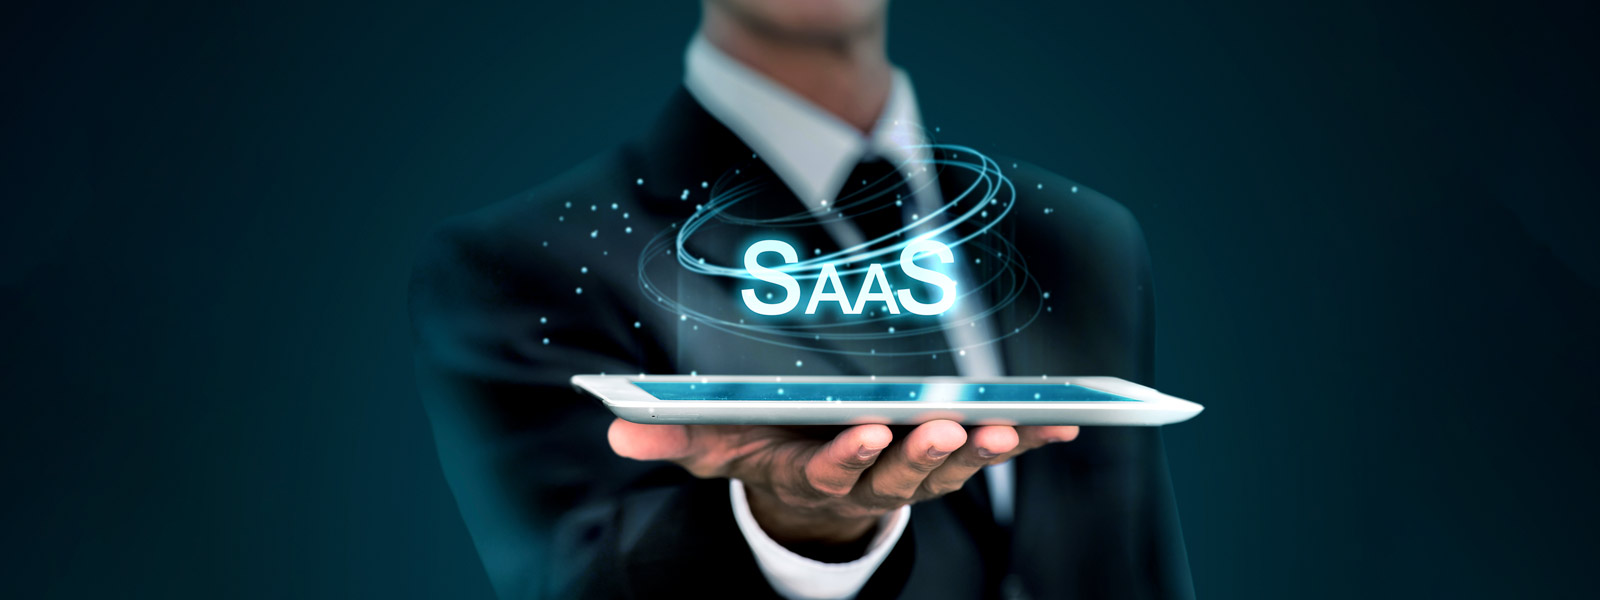 How to sart a saas company or business